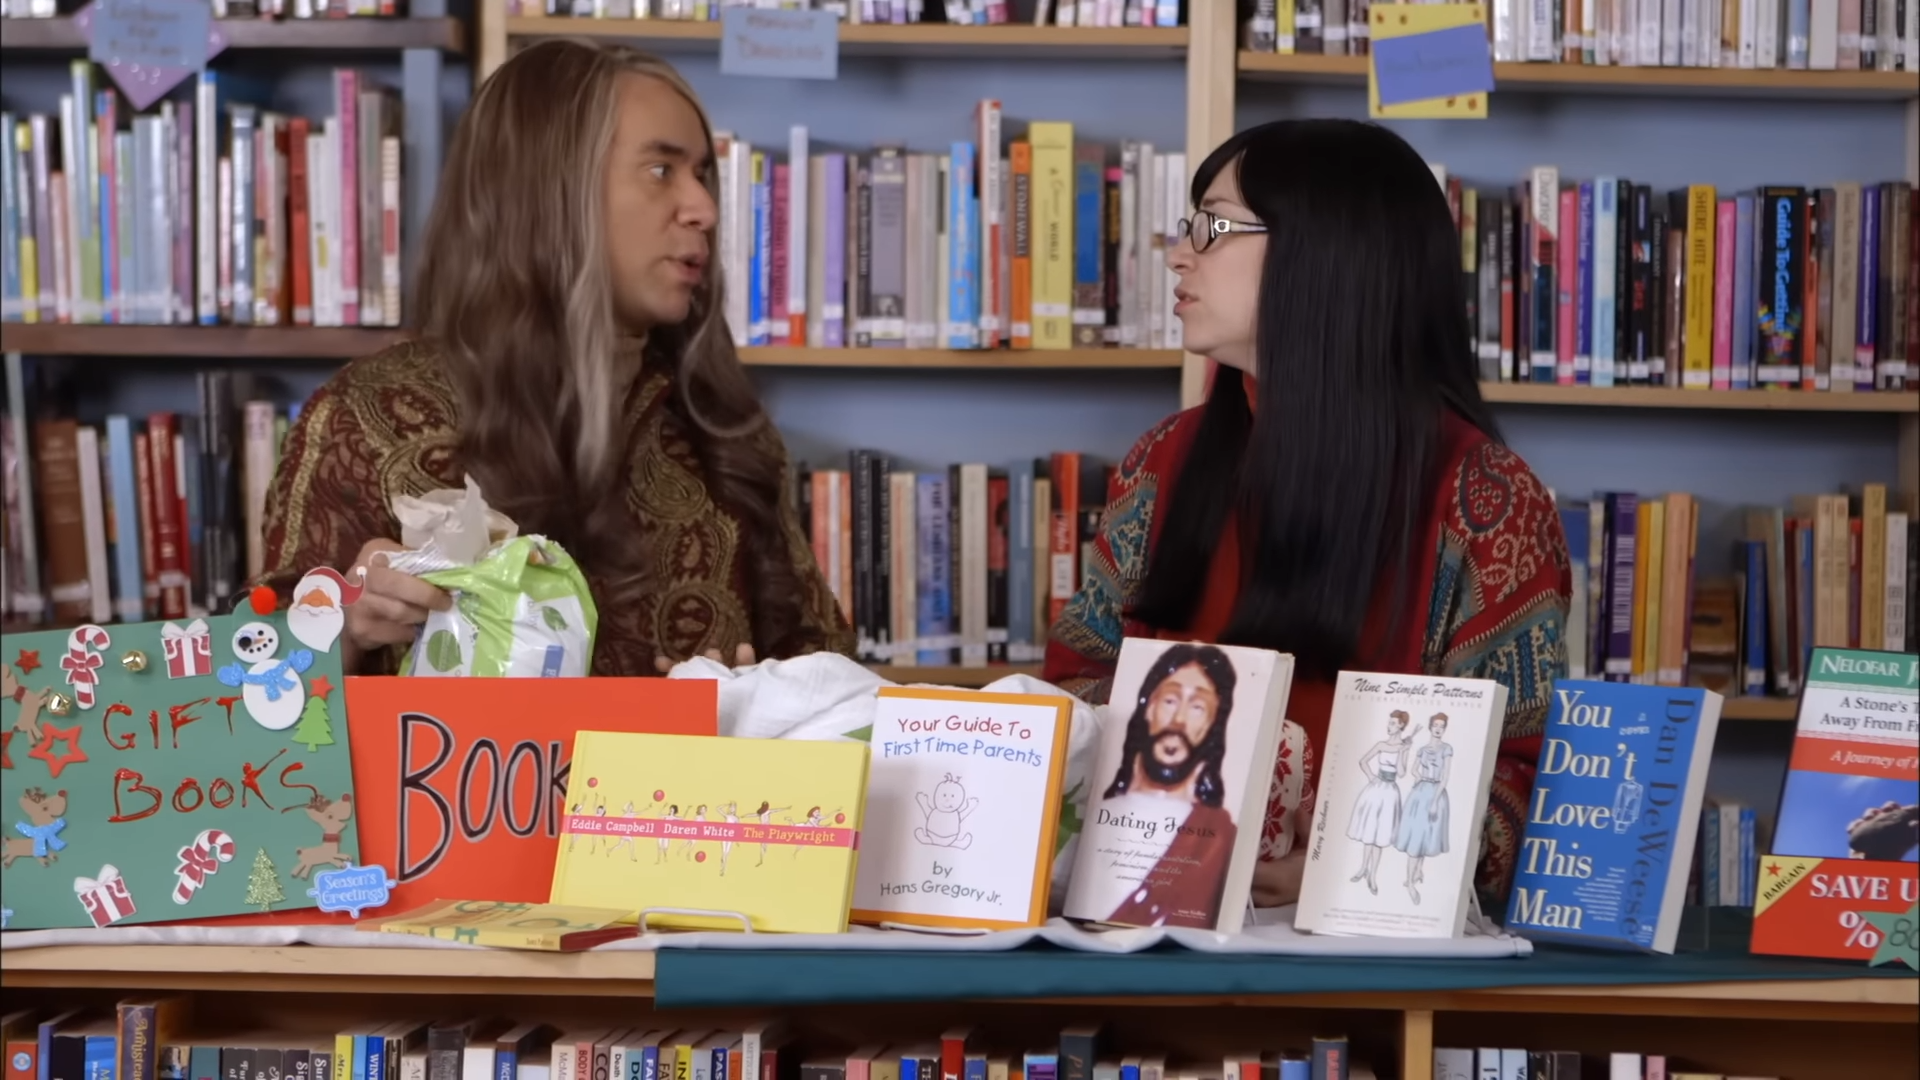 Fred Armisen and Carrie Brownstein are playing characters from &quot;Portlandia&quot; in a bookstore